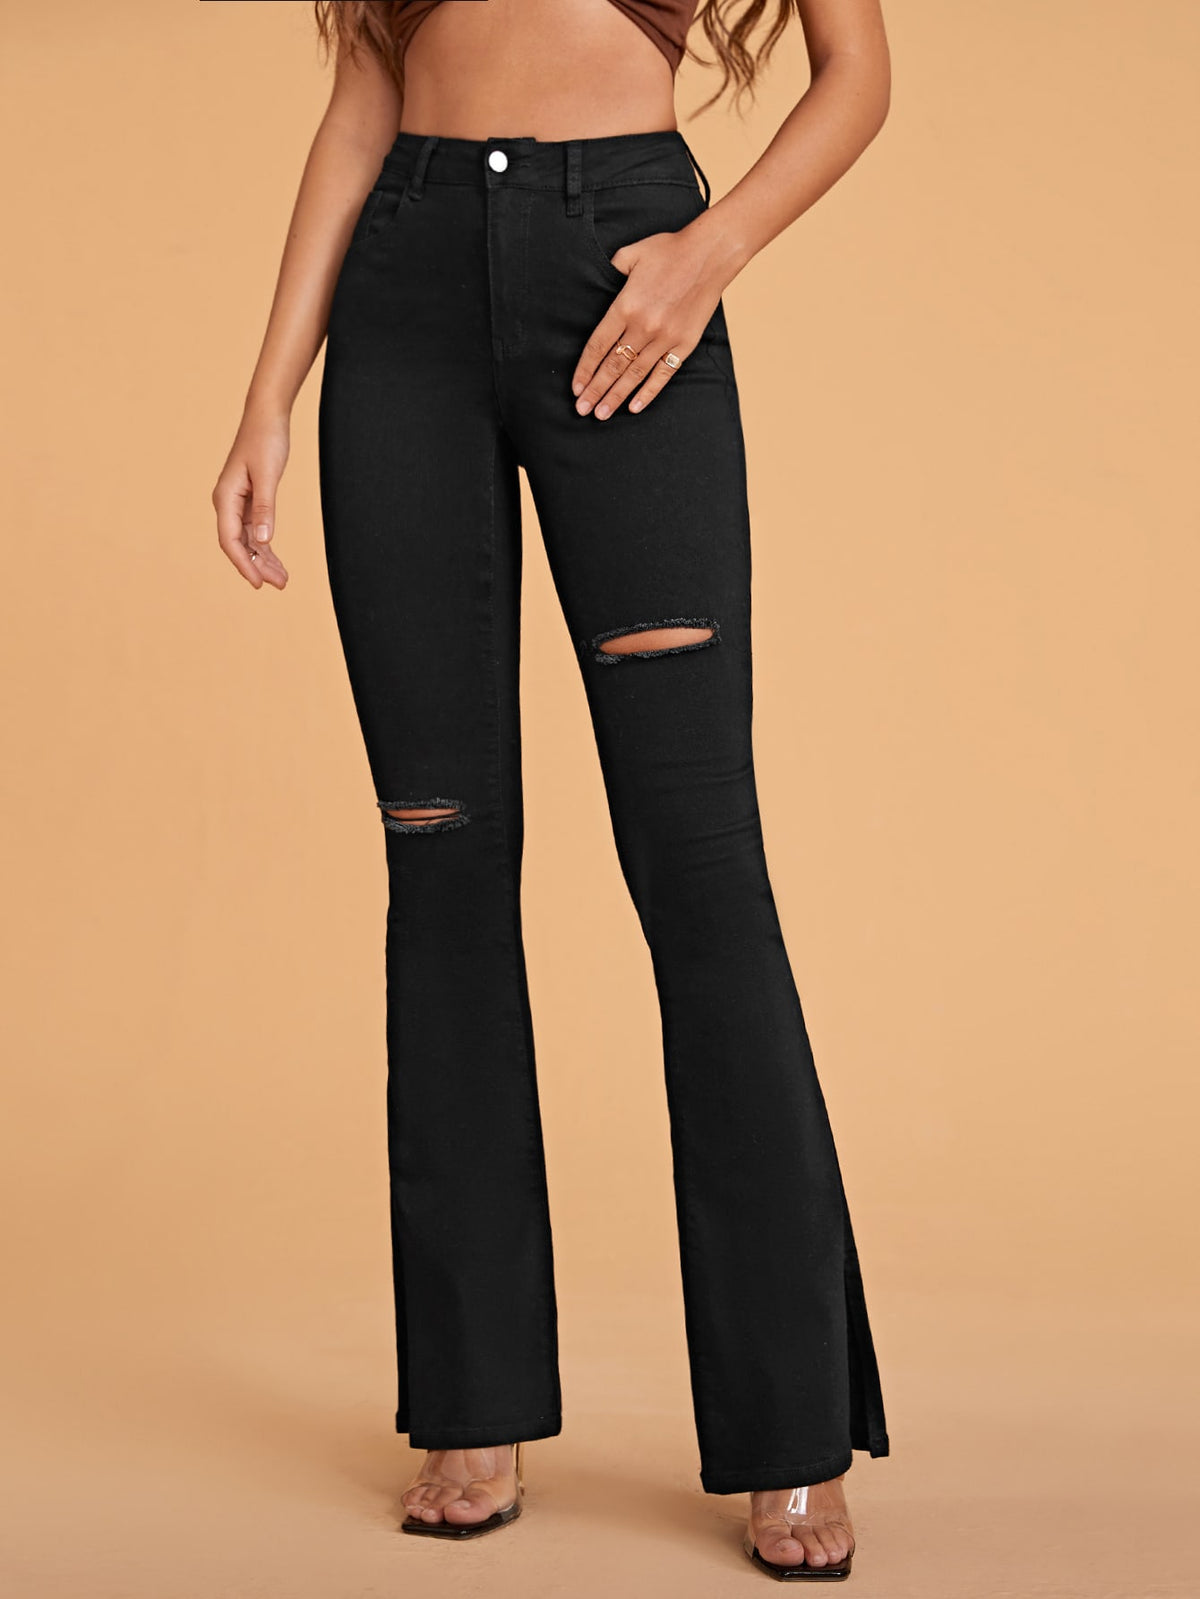 Ripped Flare Leg Jeans with High Waist - 